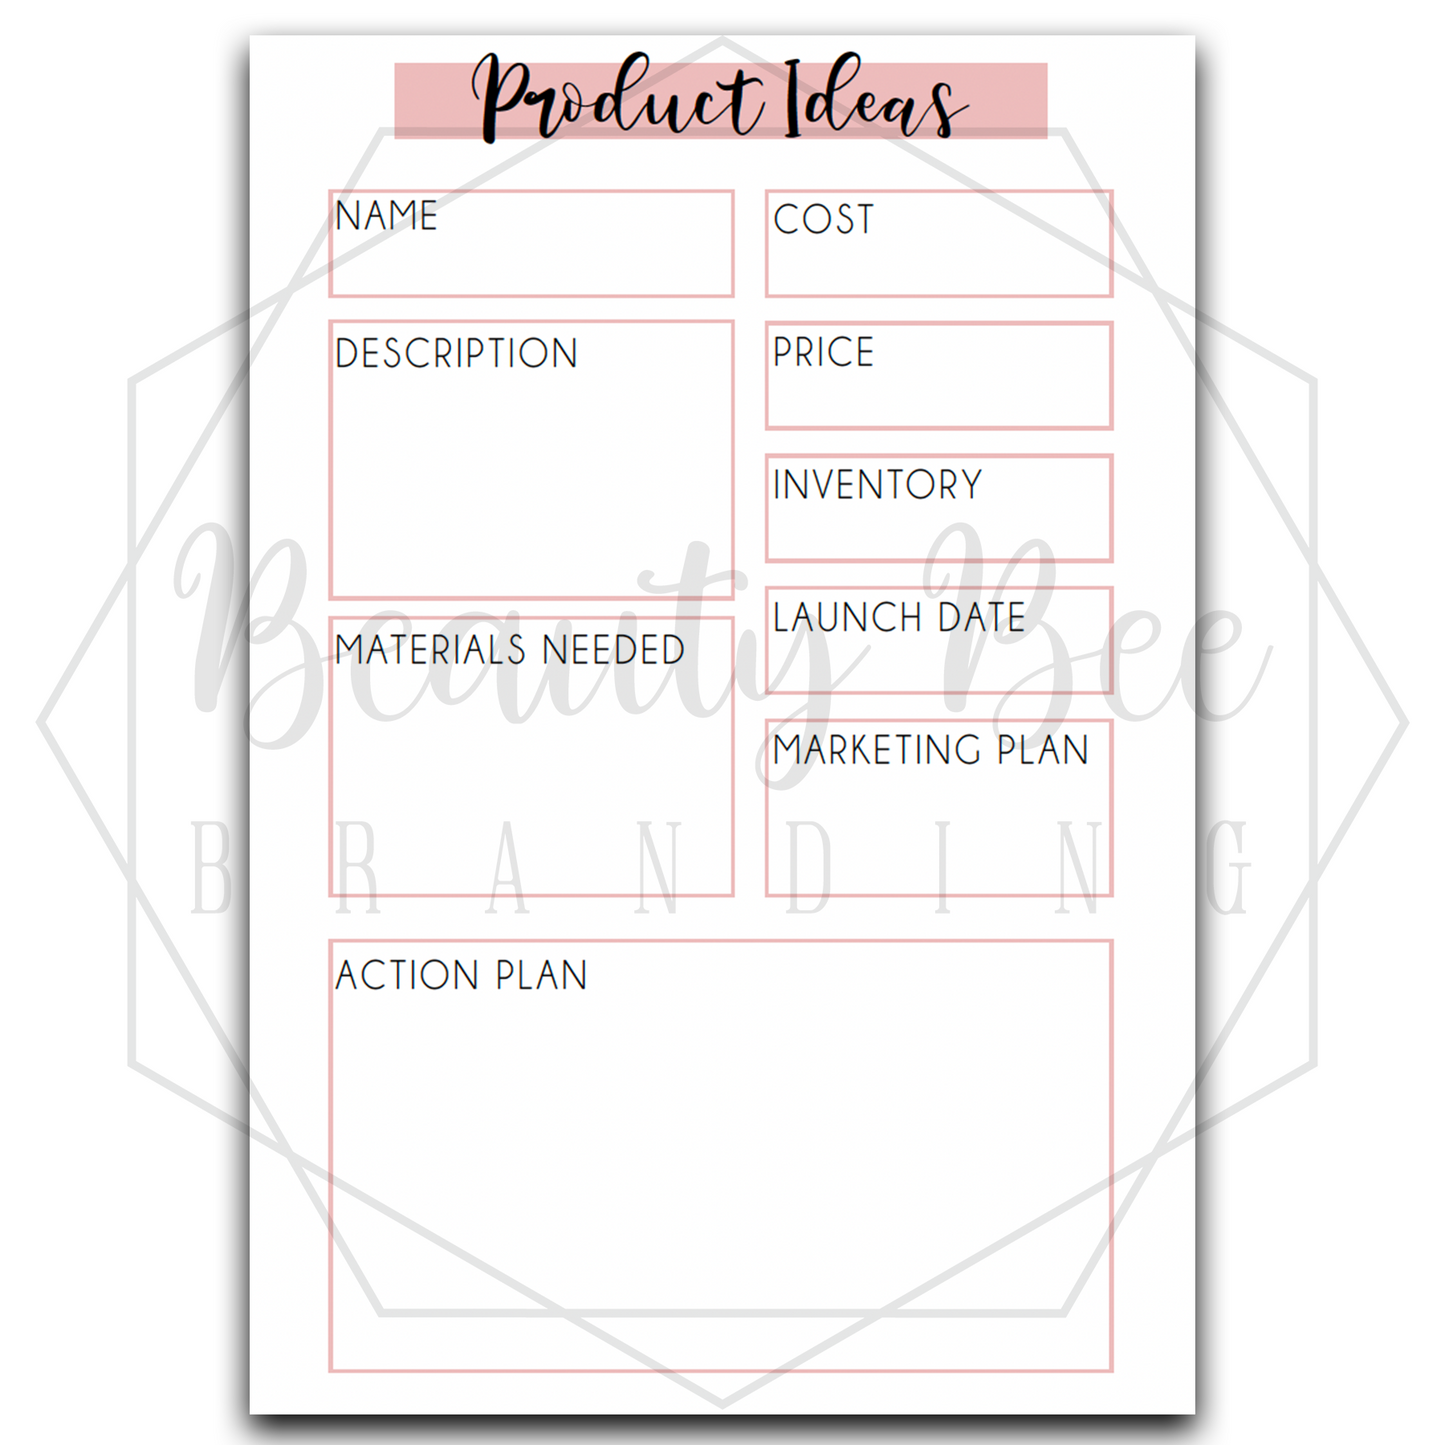 Planner Inserts - Product Ideas